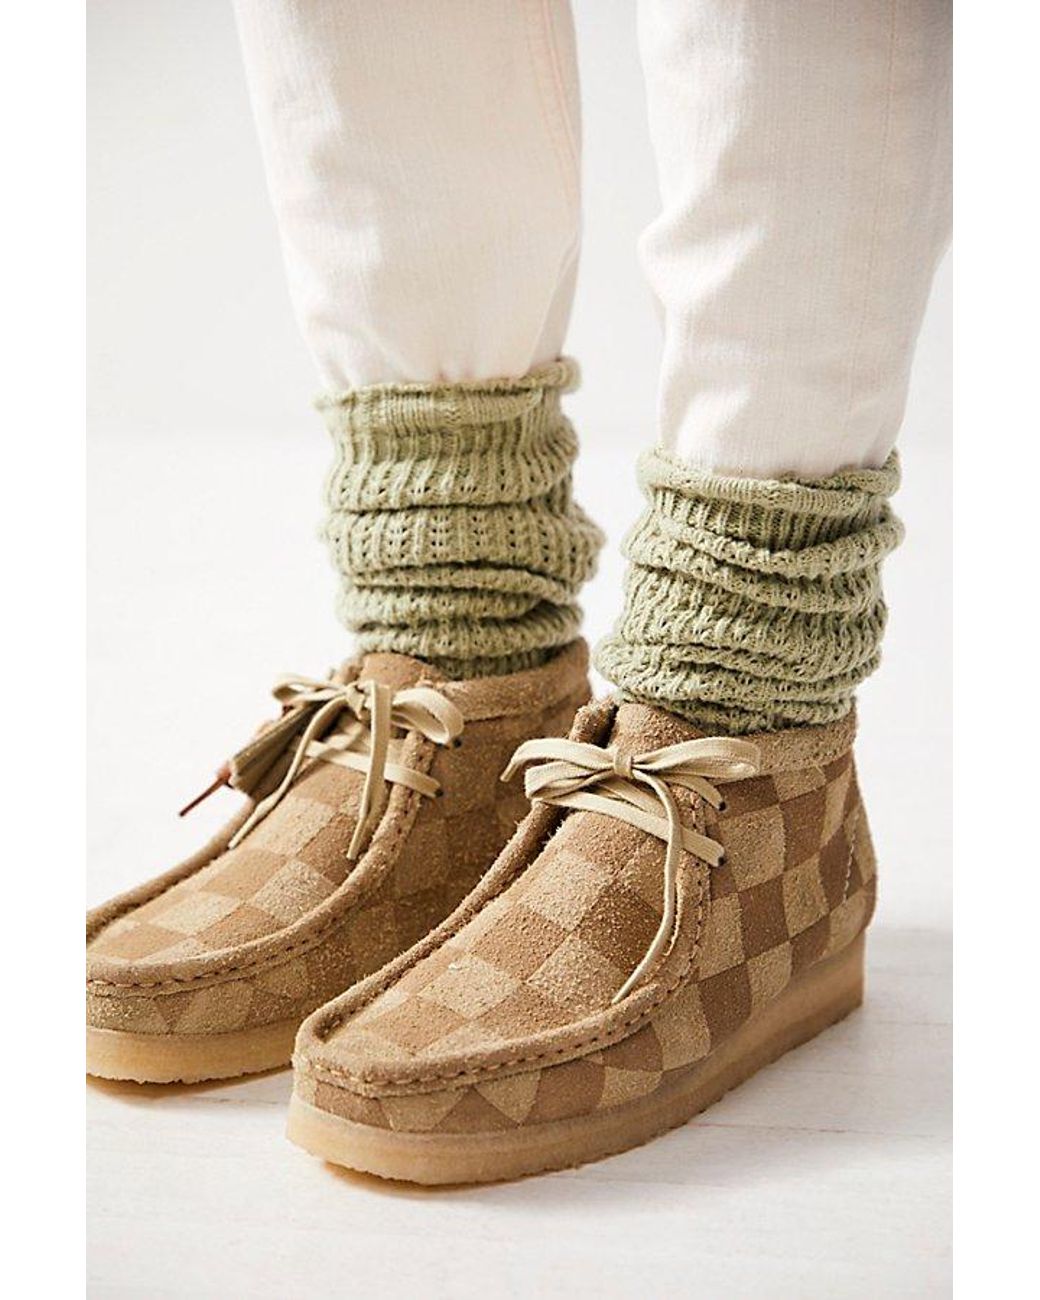 Free People Wallabee Check Boots in Natural | Lyst